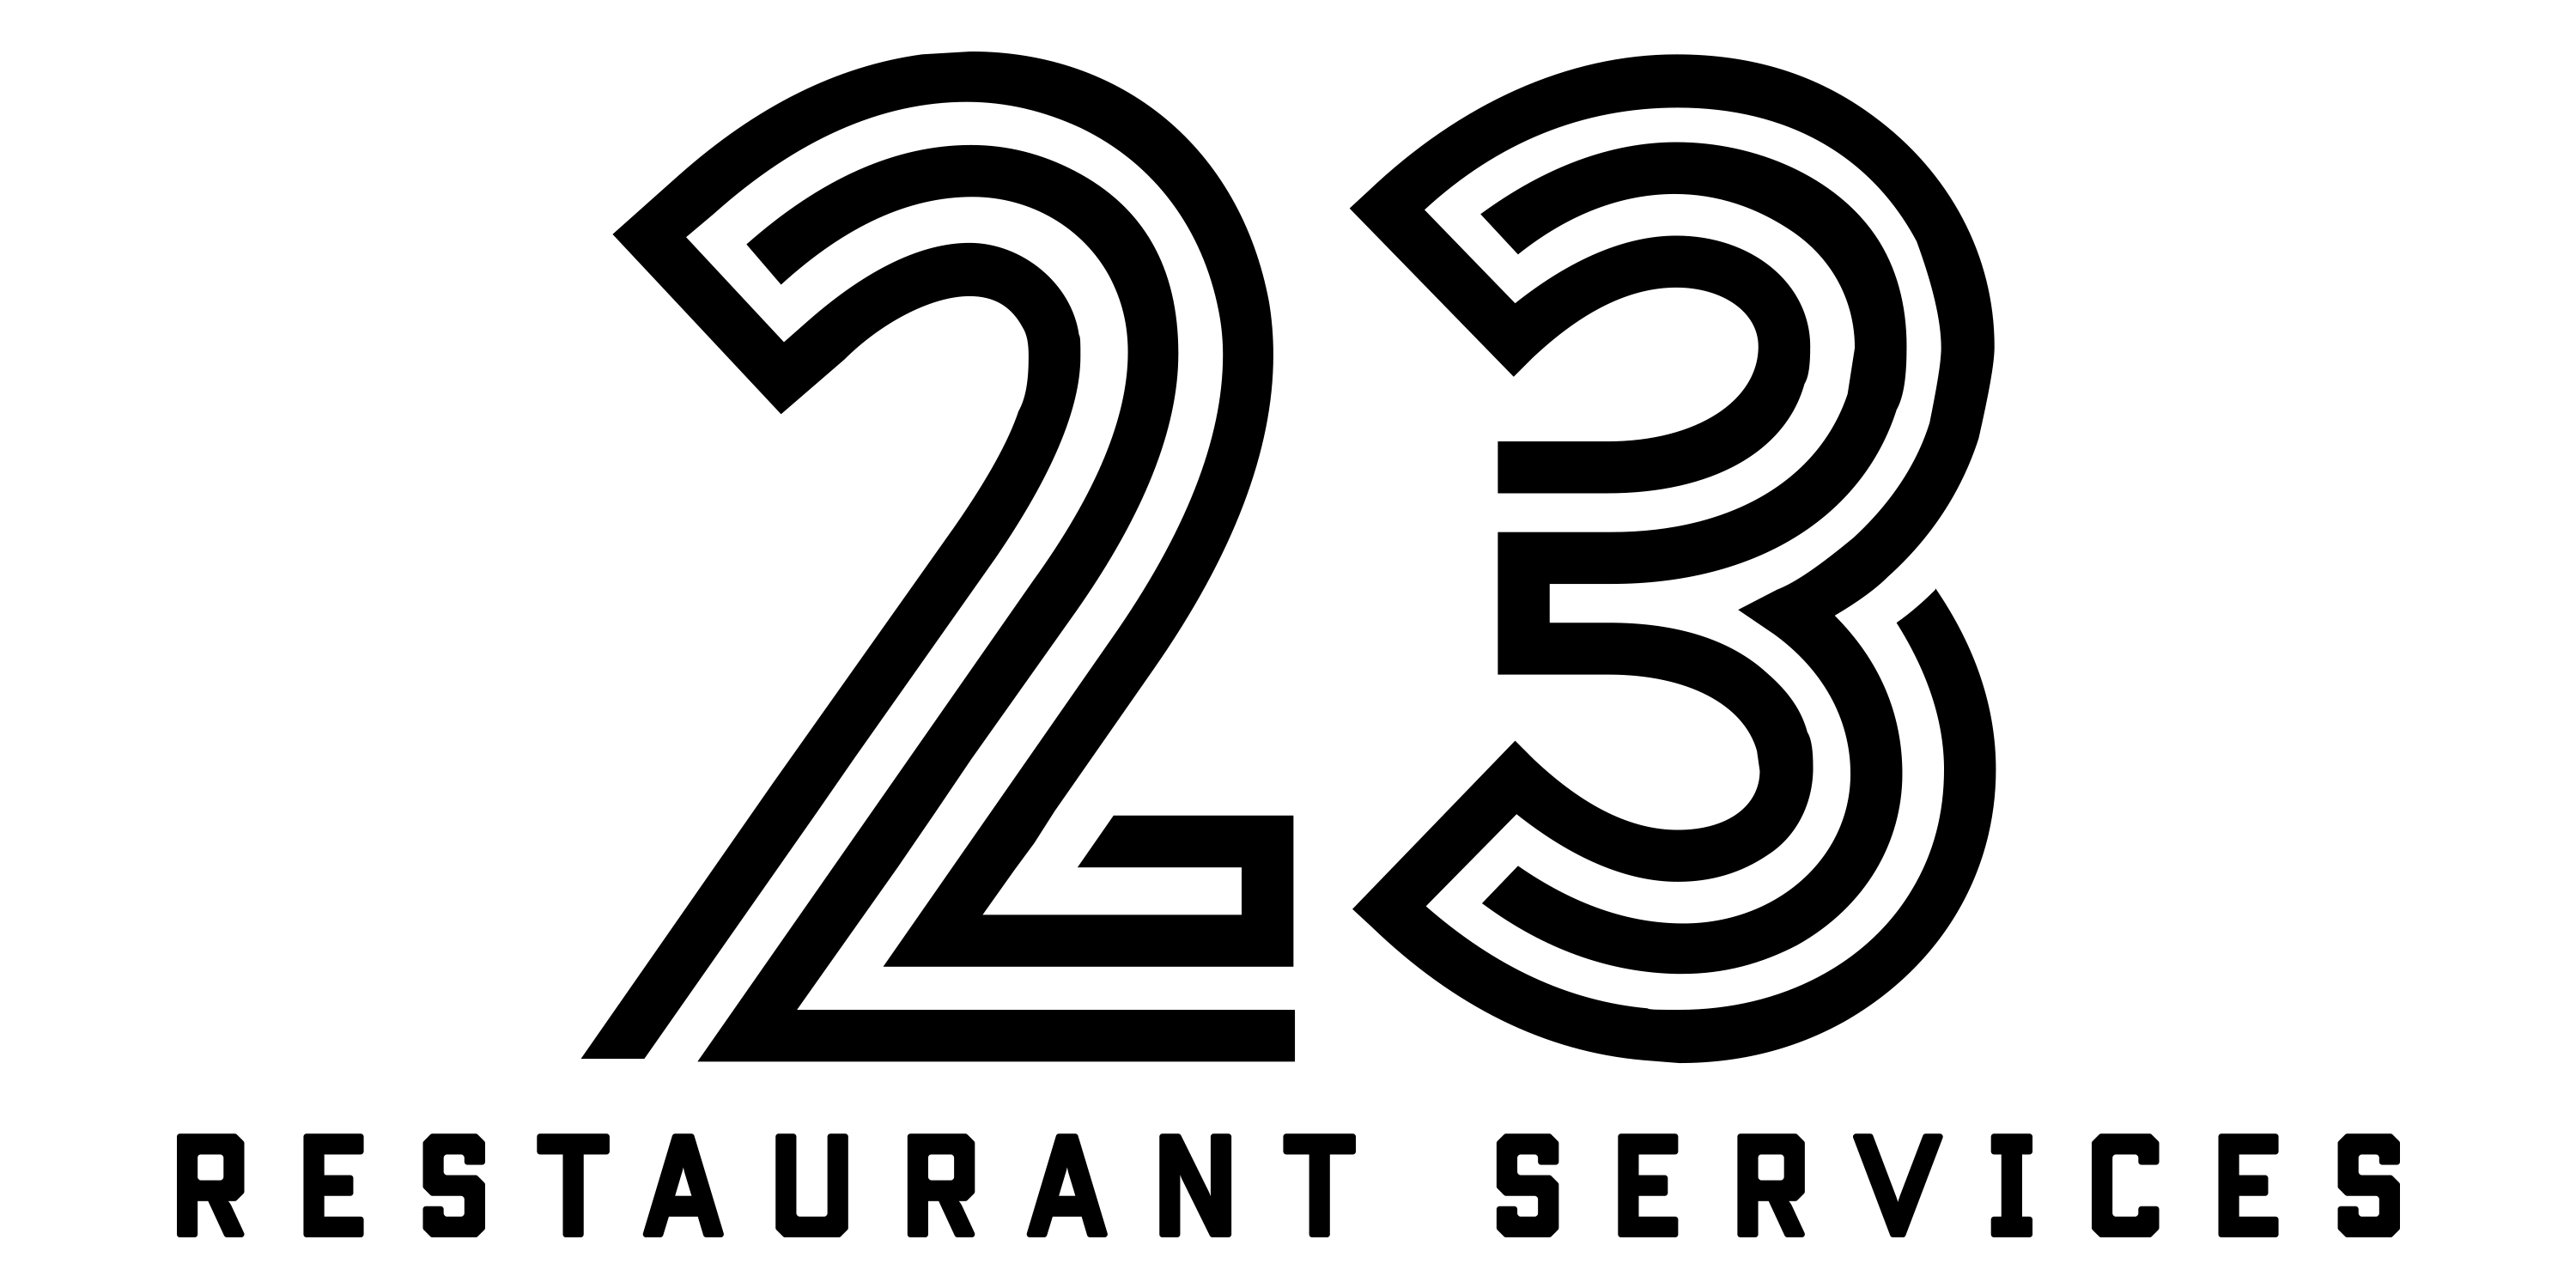 23 Logo - 23 Restaurant Services | We design, build, manage, and operate ...